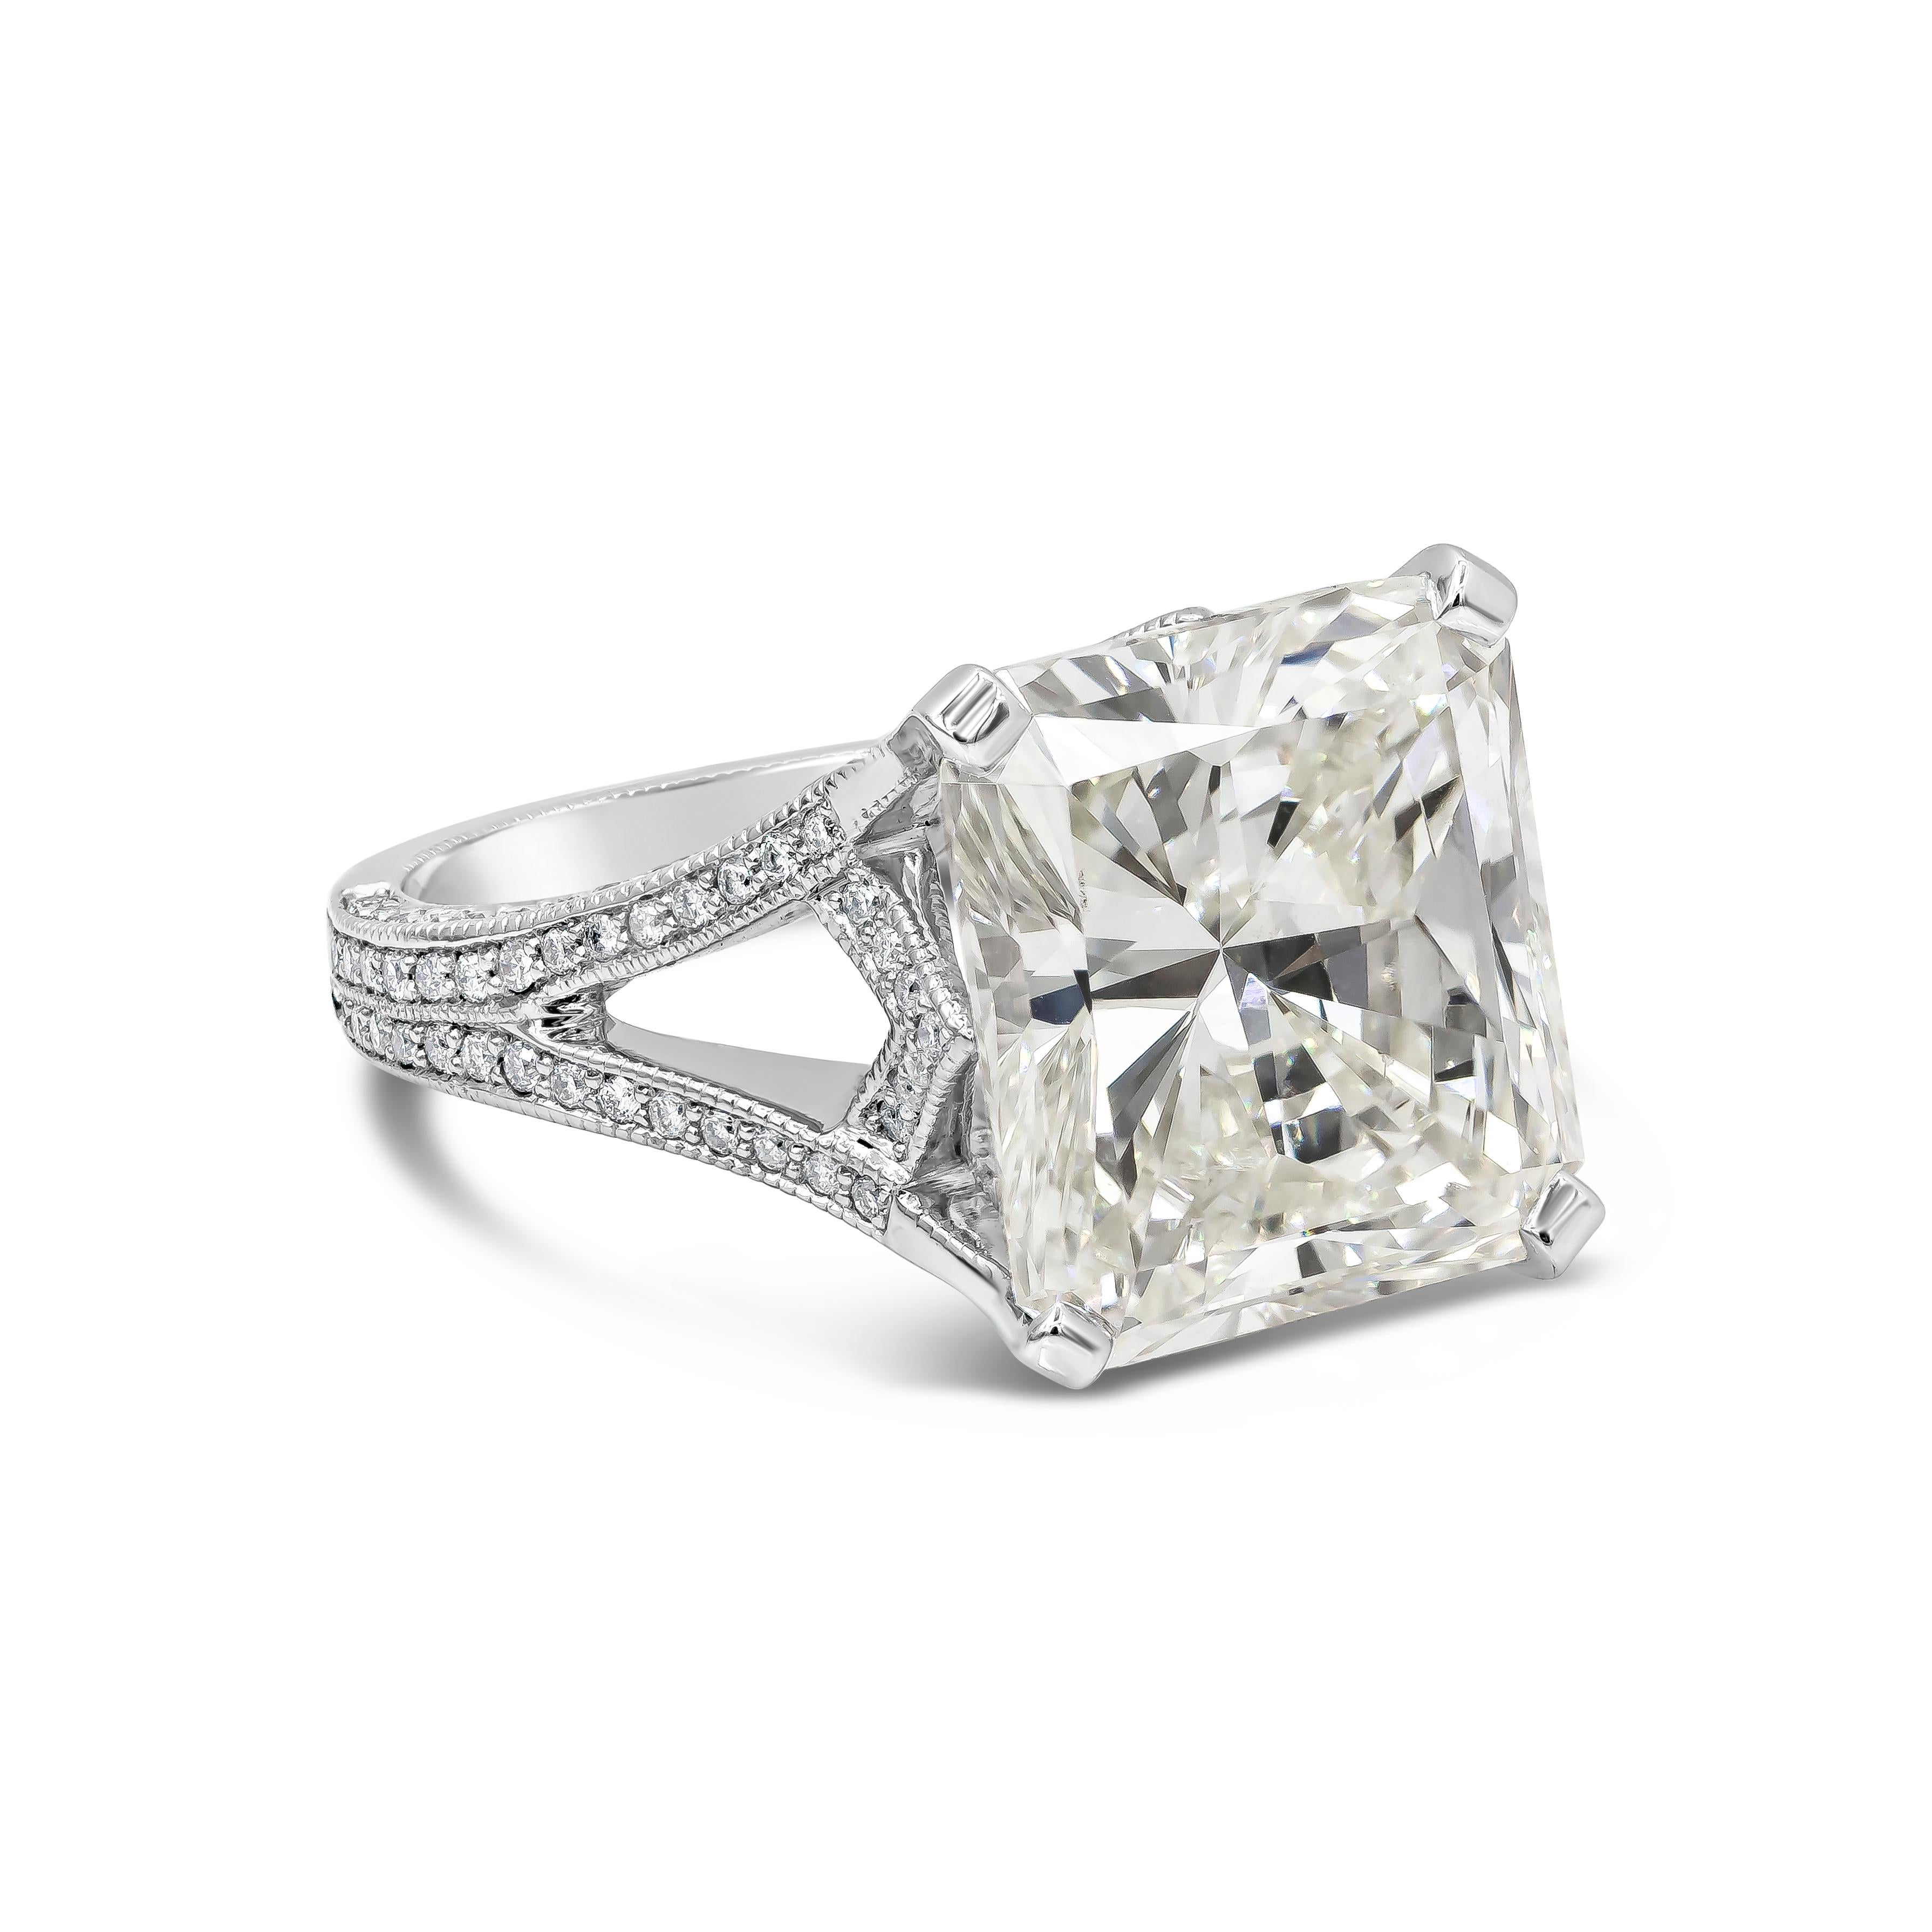 Showcasing a GIA Certified 10.65 carat radiant cut diamond center stone, K Color and Si1 in Clarity. Set on an intricate double shank design that merges into a single shank half way through the ring. Accenting round diamonds weighing 1.50 carats